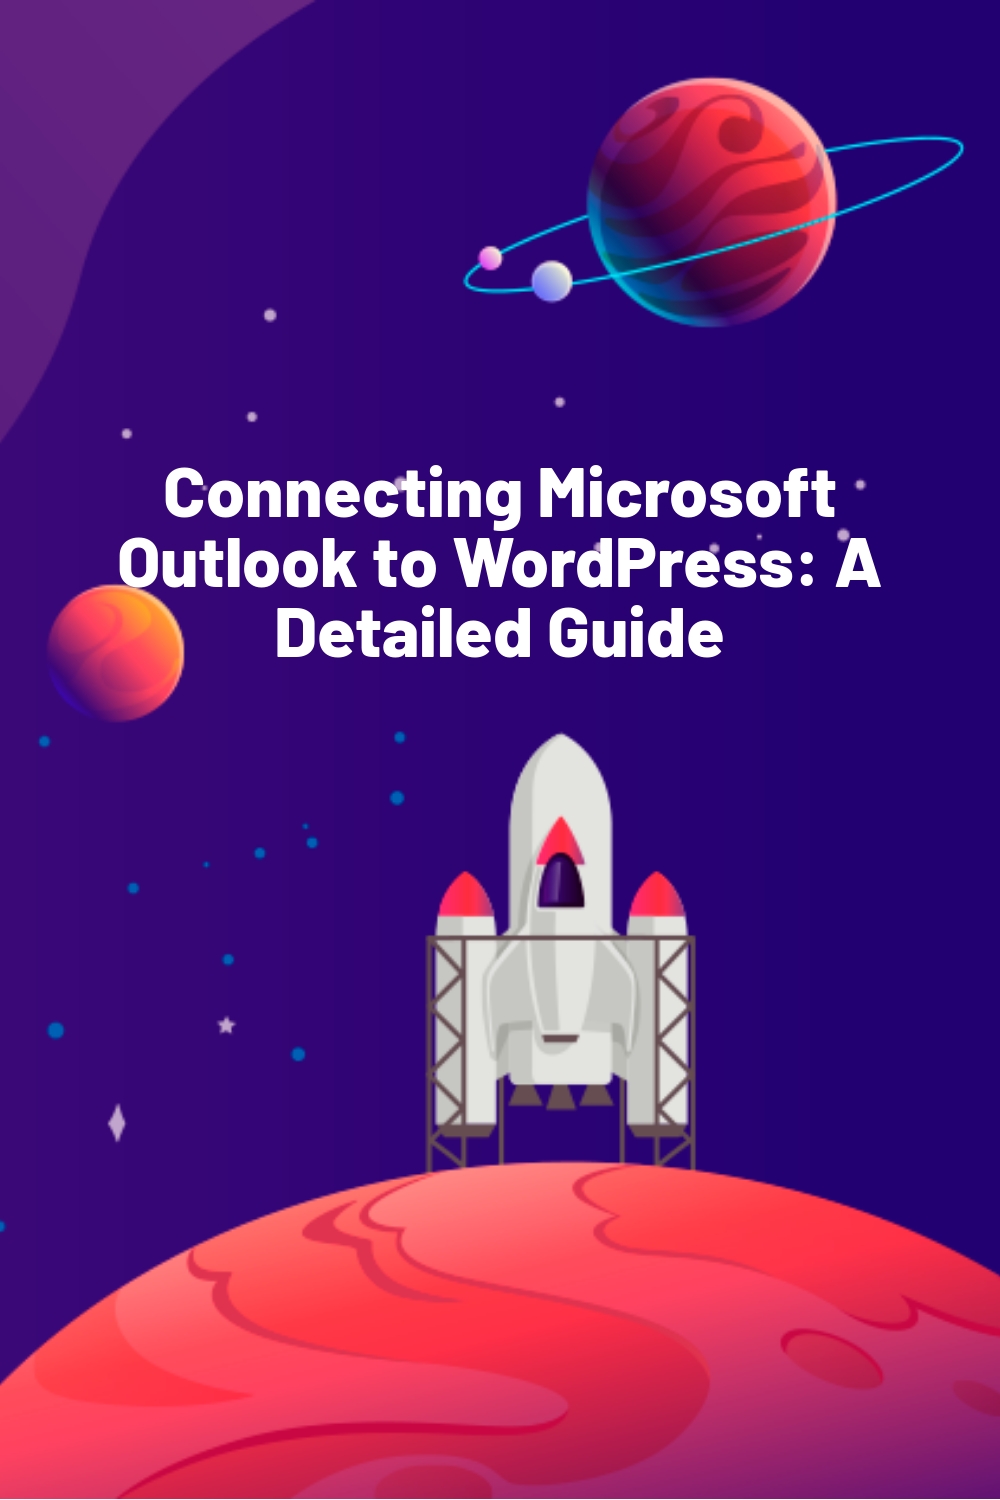 Connecting Microsoft Outlook to WordPress: A Detailed Guide